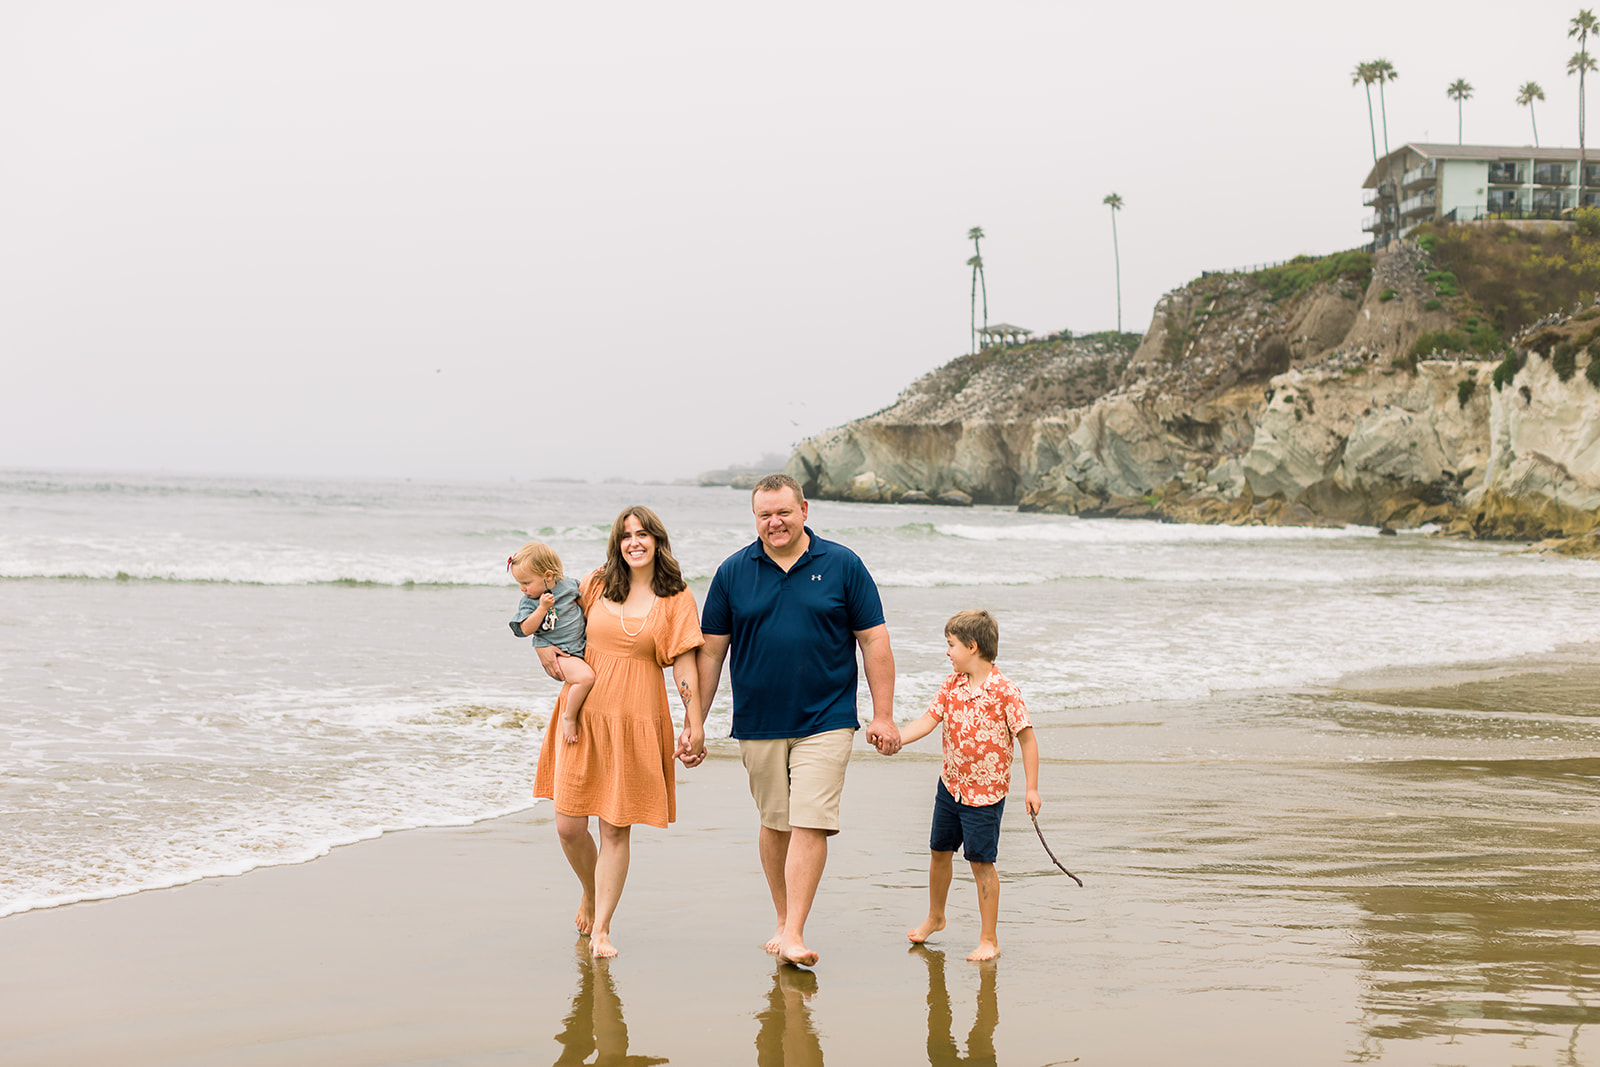 A heartwarming family moment captured against the stunning backdrop of Pismo Beach's pristine shoreline. 